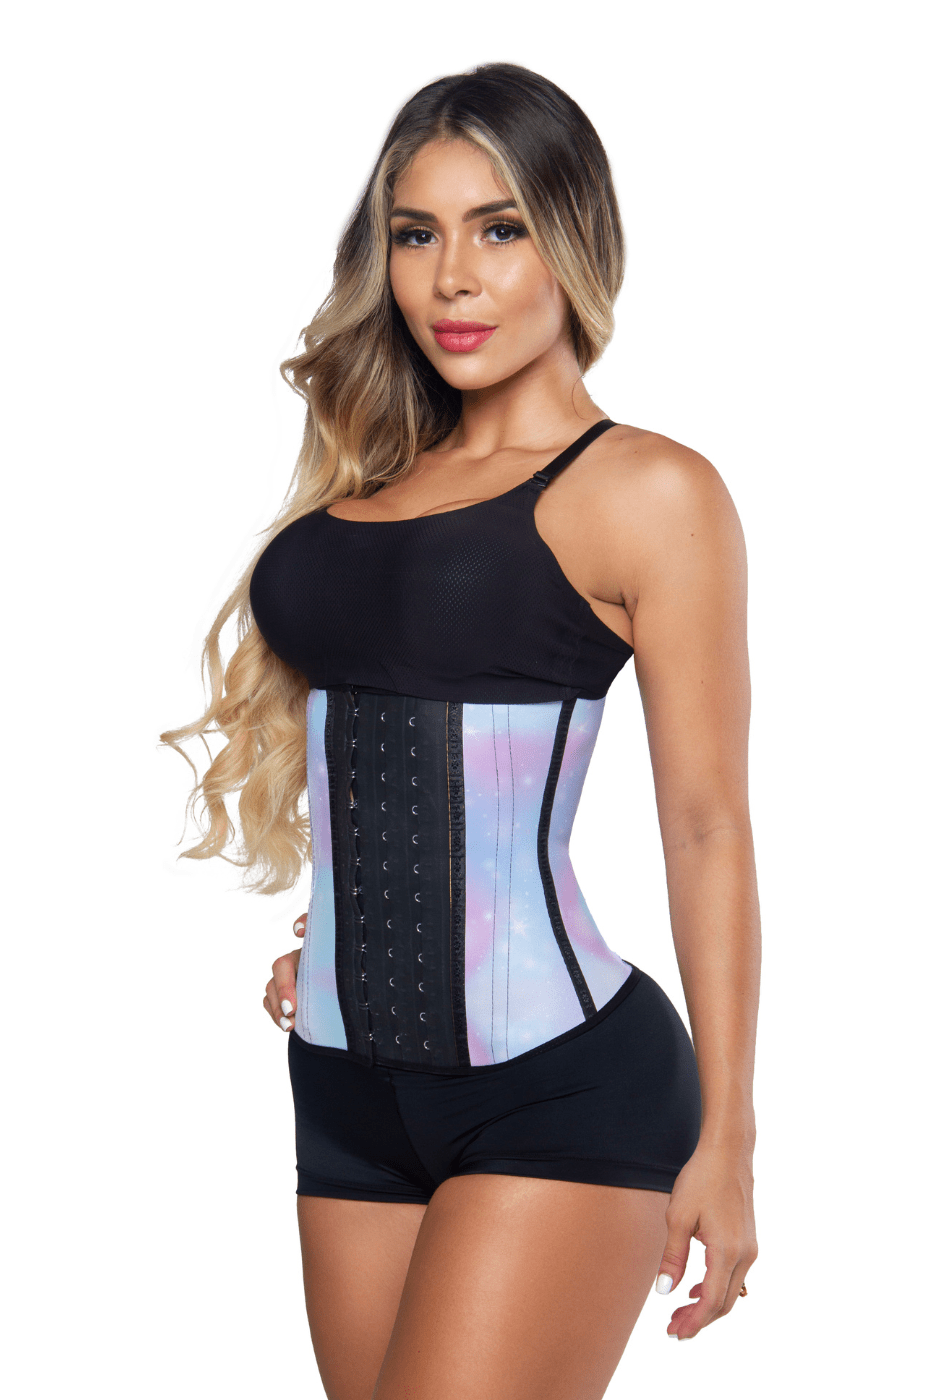 Ultimate Starter Package. 2 Waist Trainers + Accessories !